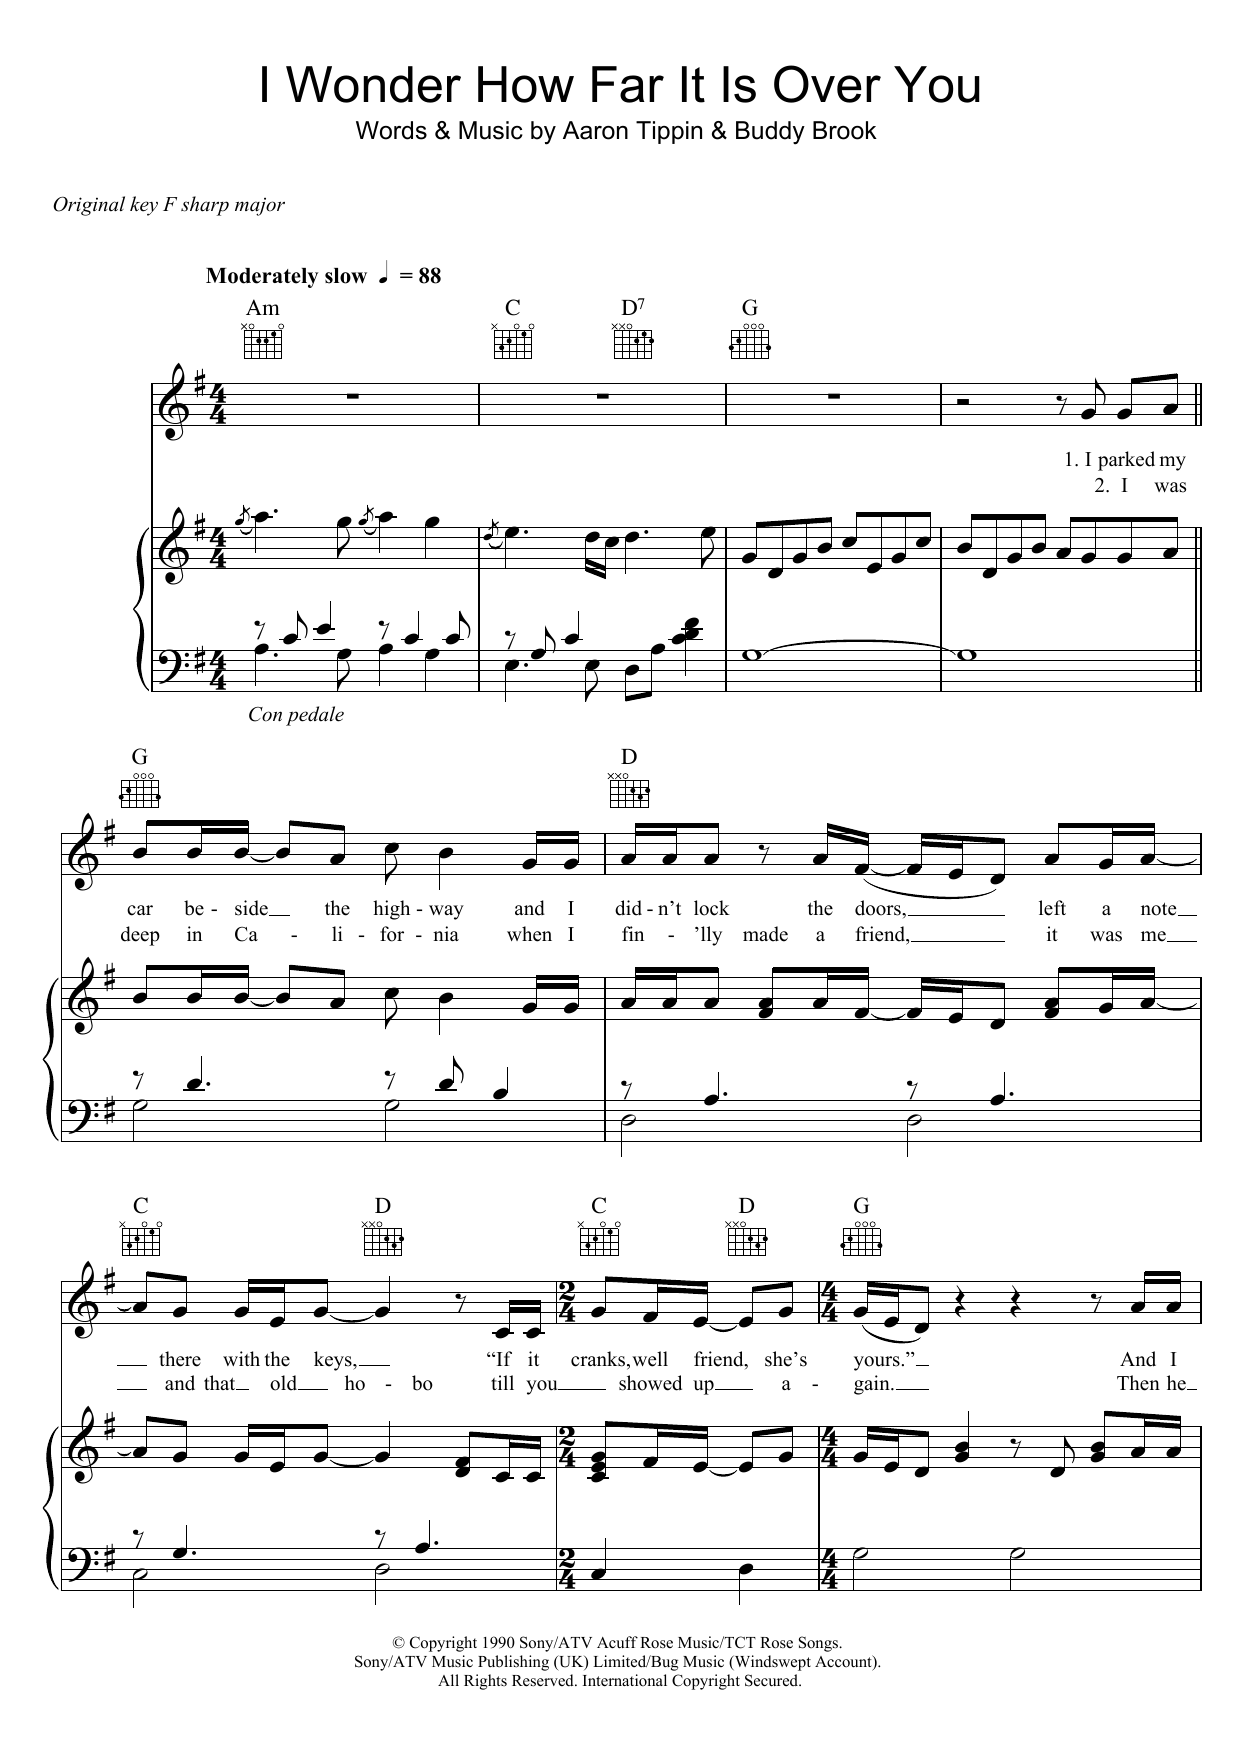 Download Aaron Tippin I Wonder How Far It Is Over You Sheet Music